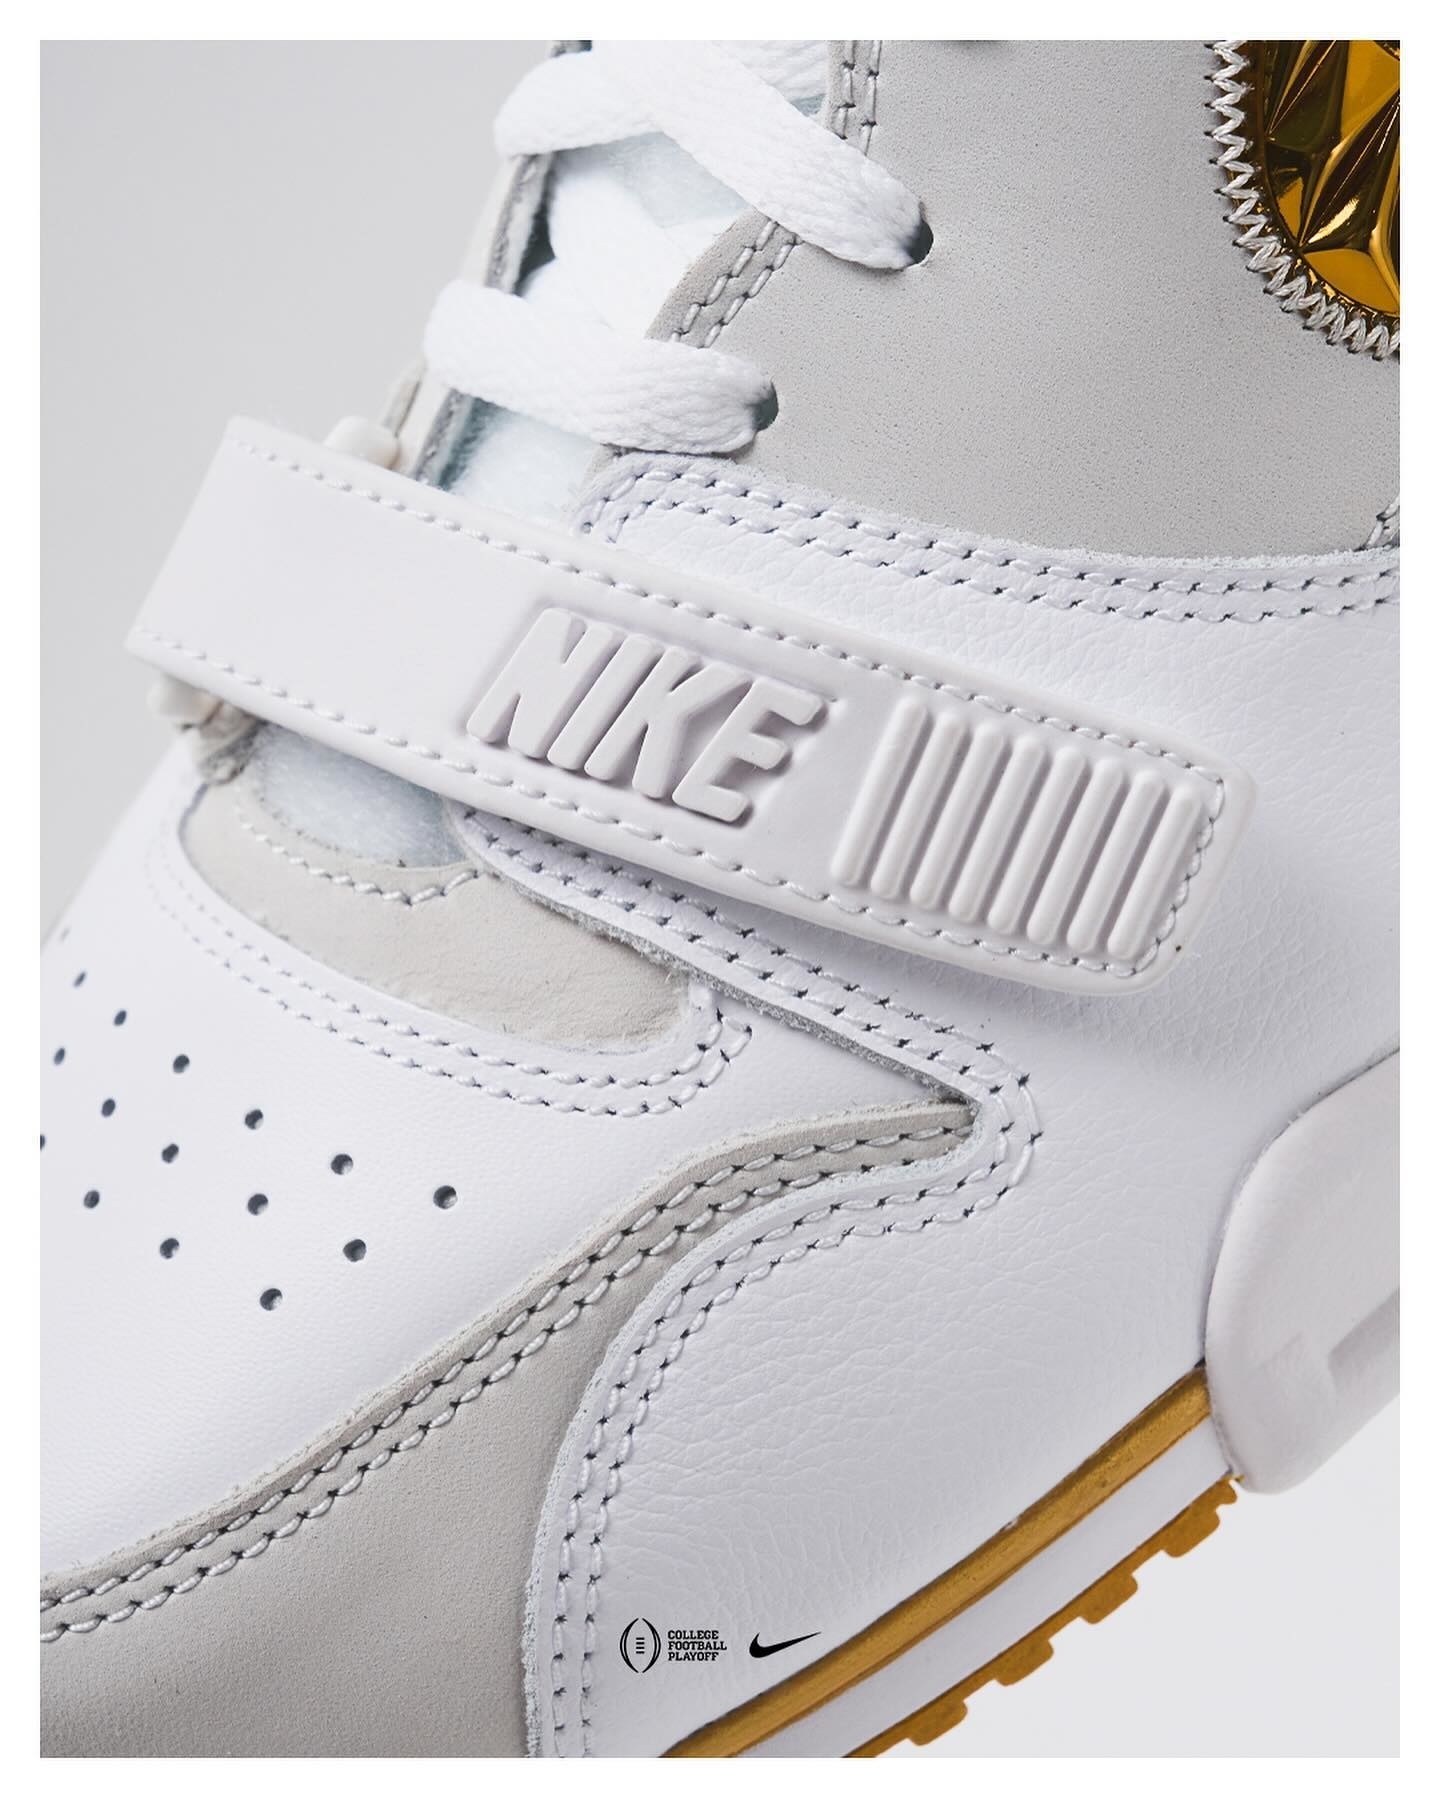 Nike Air Trainer 1 CFP Release Date White Strap